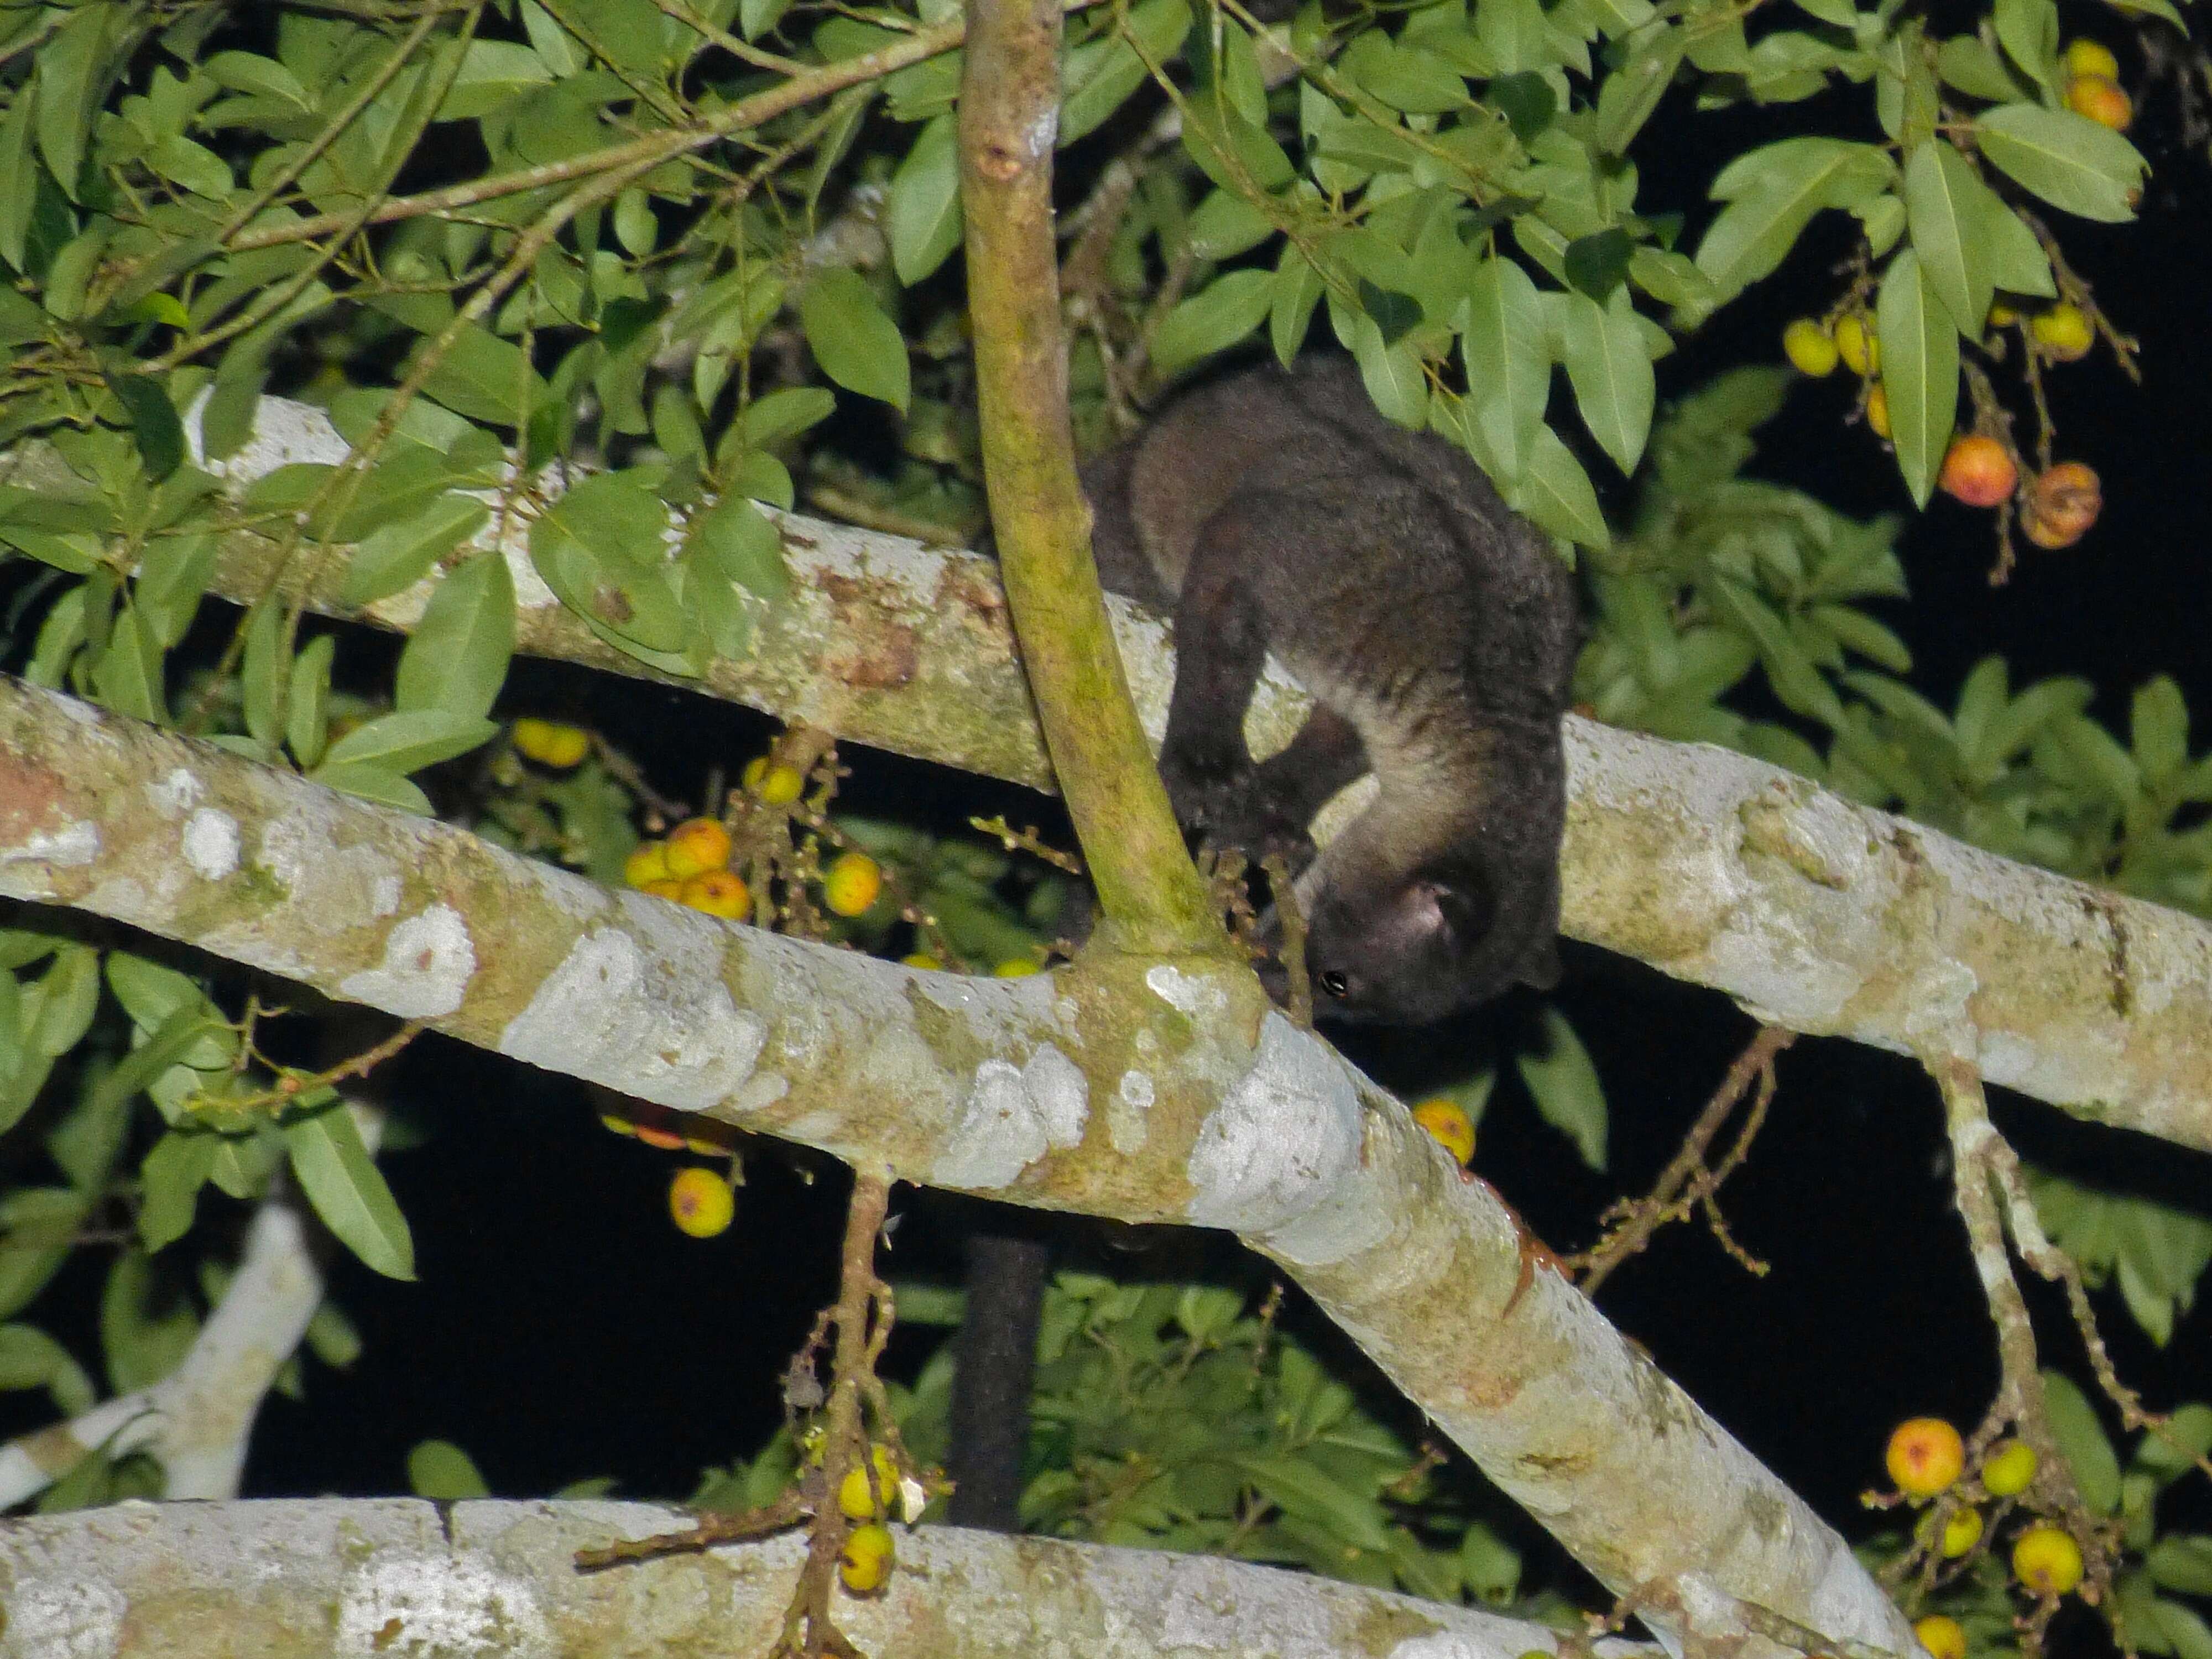 Image of Small-toothed Palm Civet